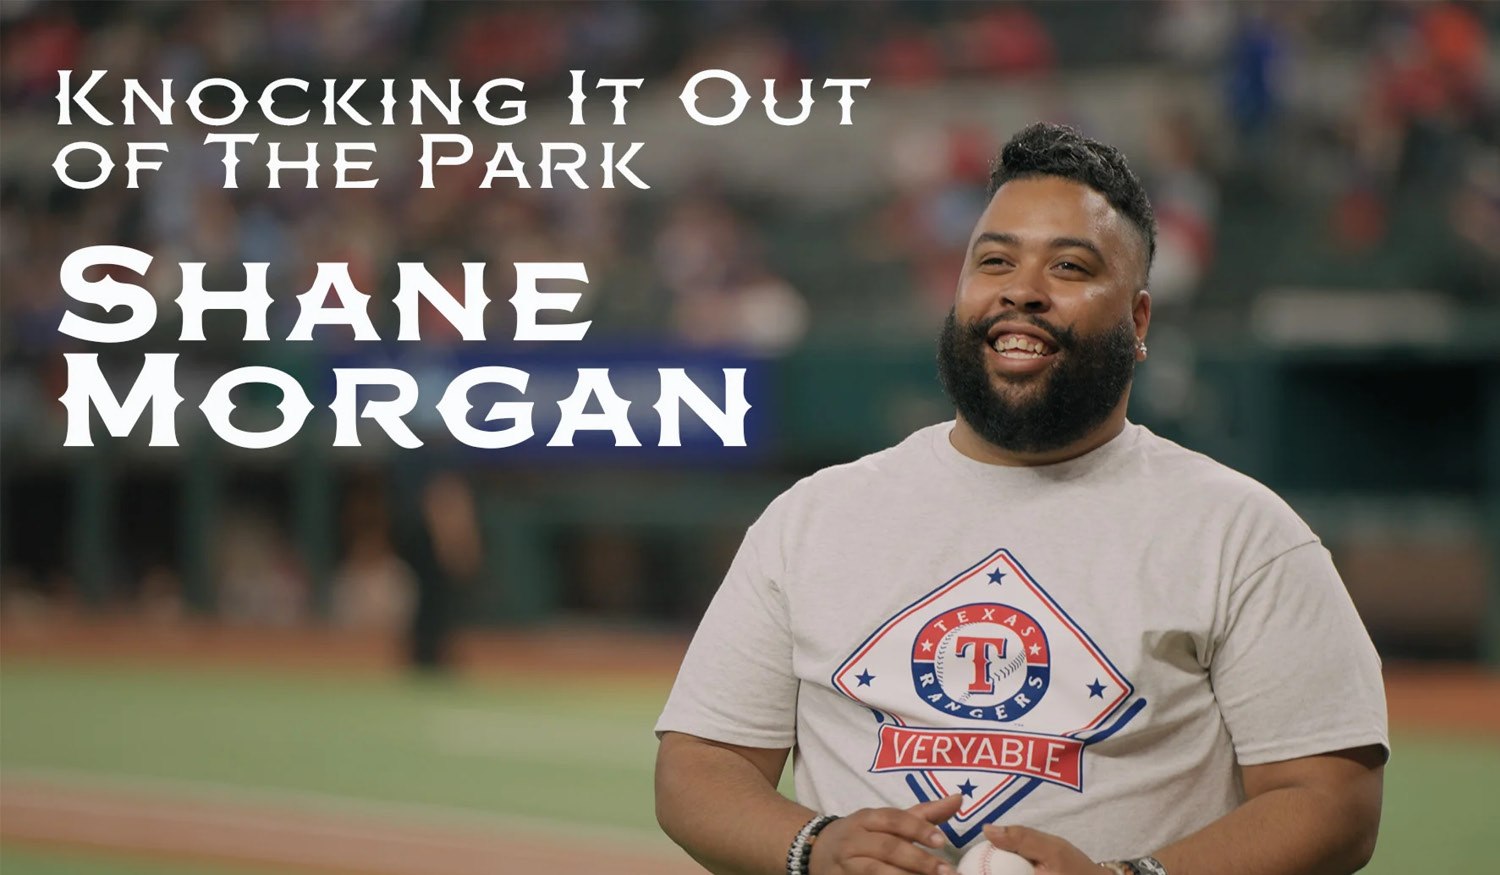 Veryable Operator Shane Morgan Throws First Pitch at Texas Rangers Game